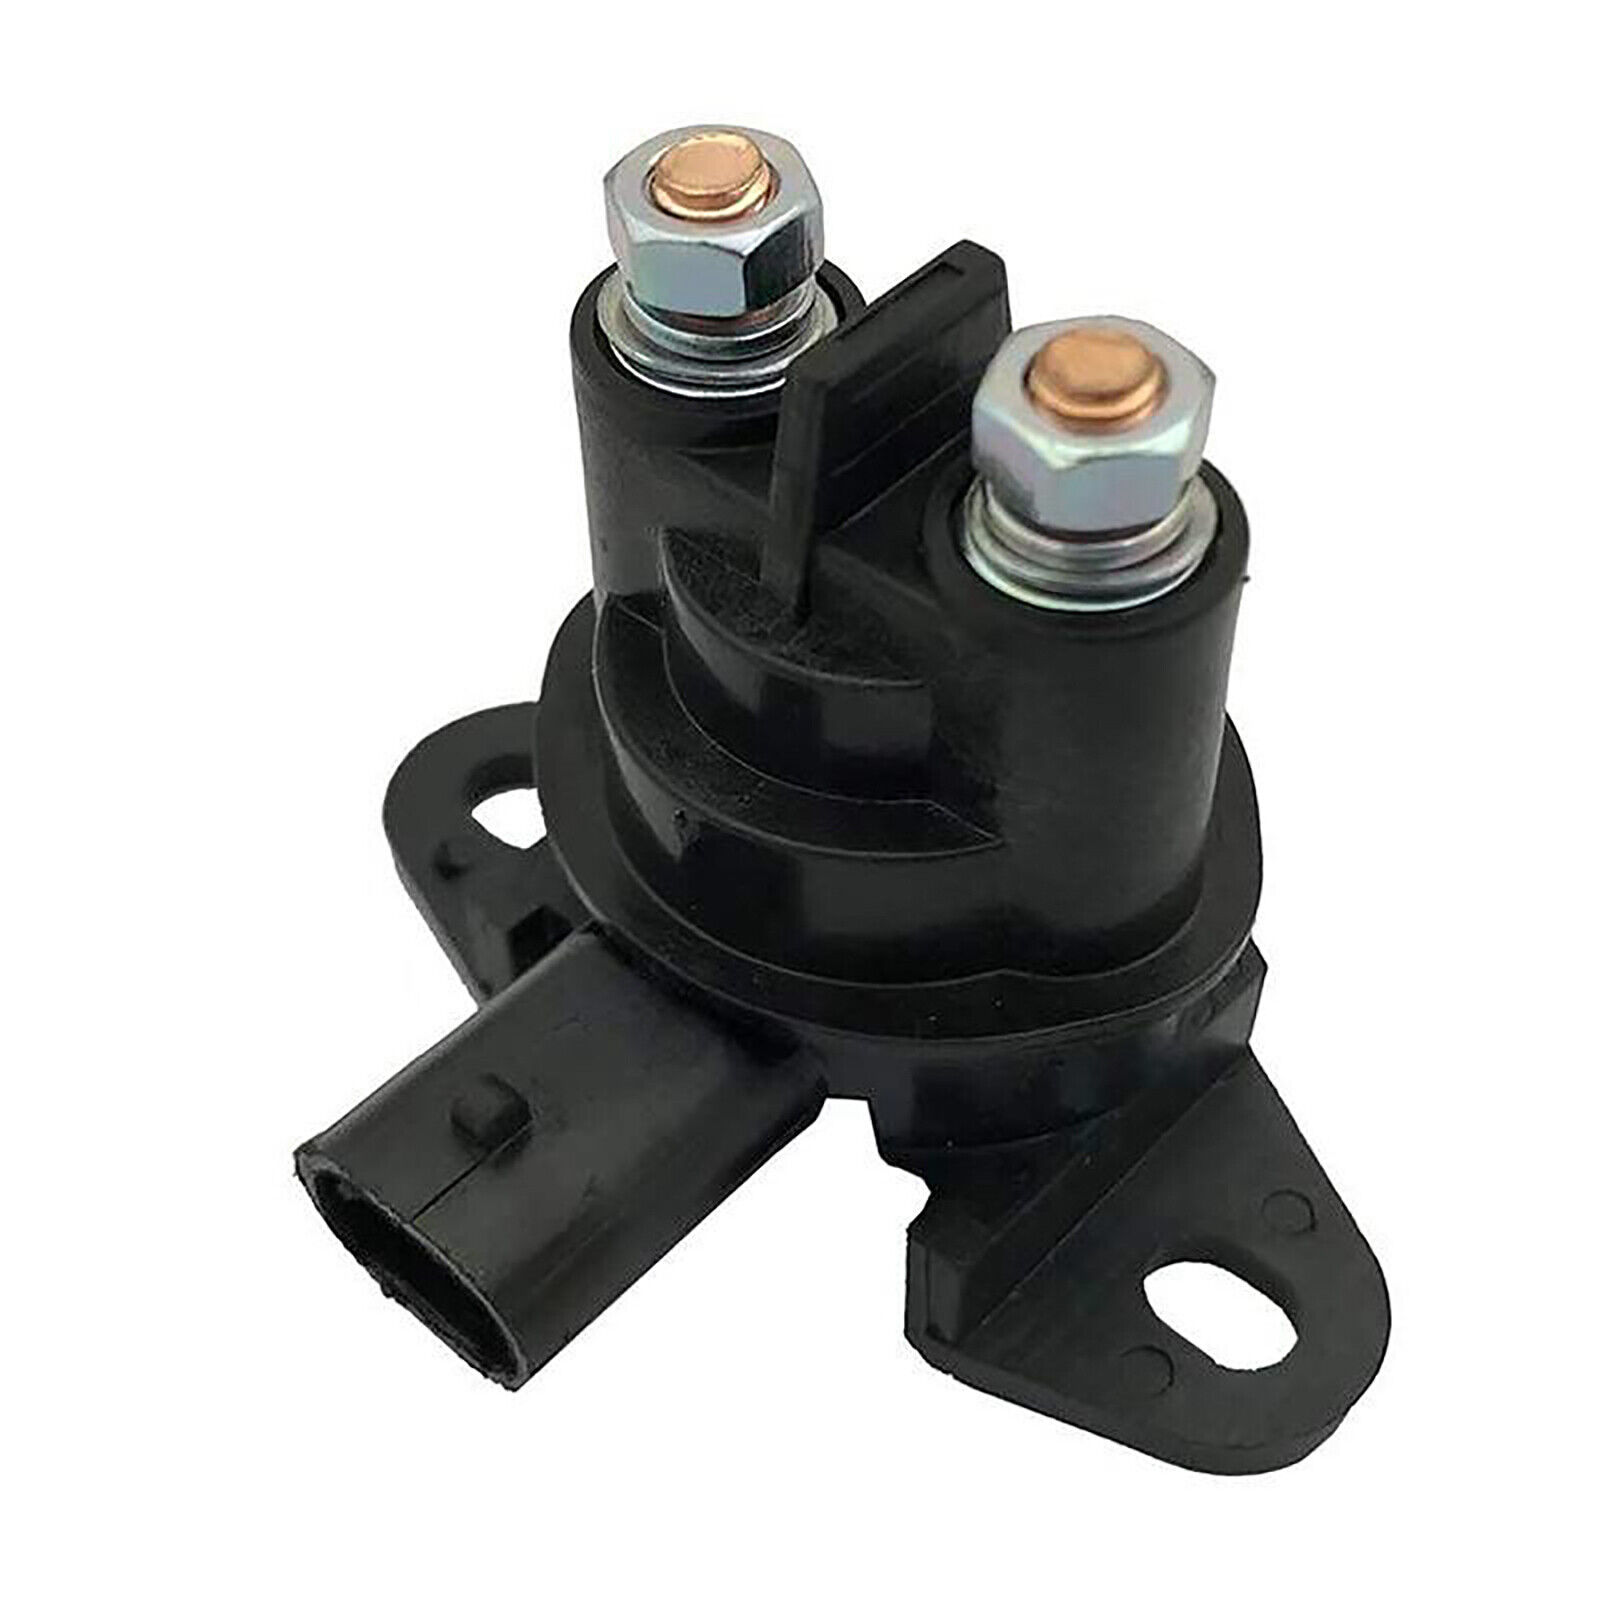 For Sea Doo/Jet Boats Motorcycle Accessories Starter Solenoid Relay Switch